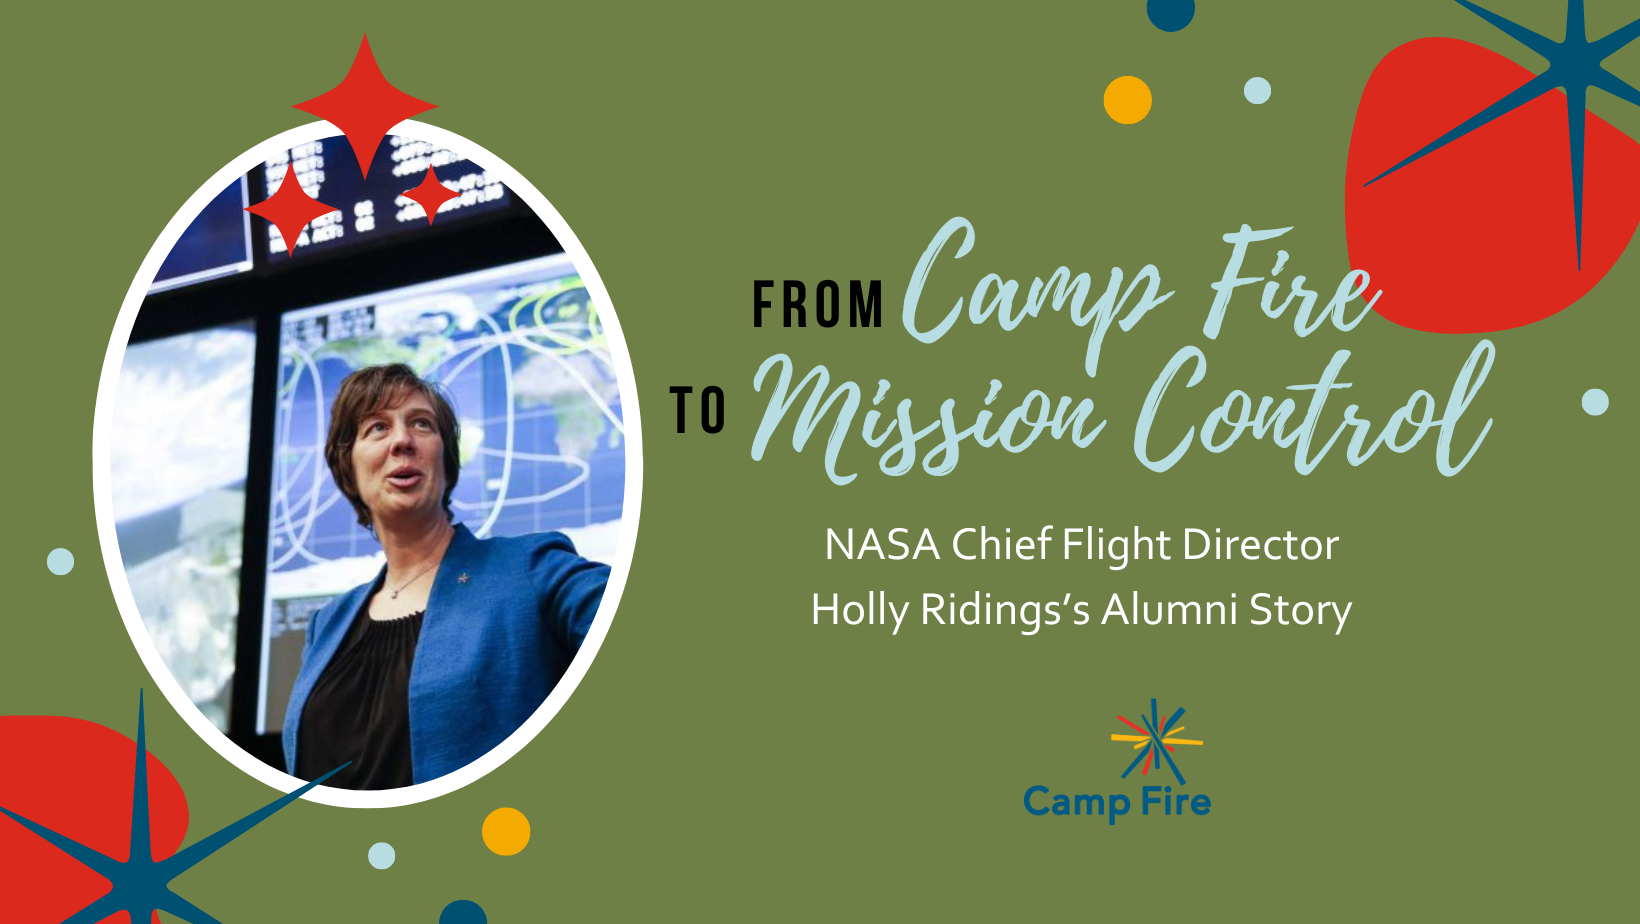 From Camp Fire to Mission Control: NASA Chief Flight Director Holly Ridings’s Alumni Story, a Camp Fire blog